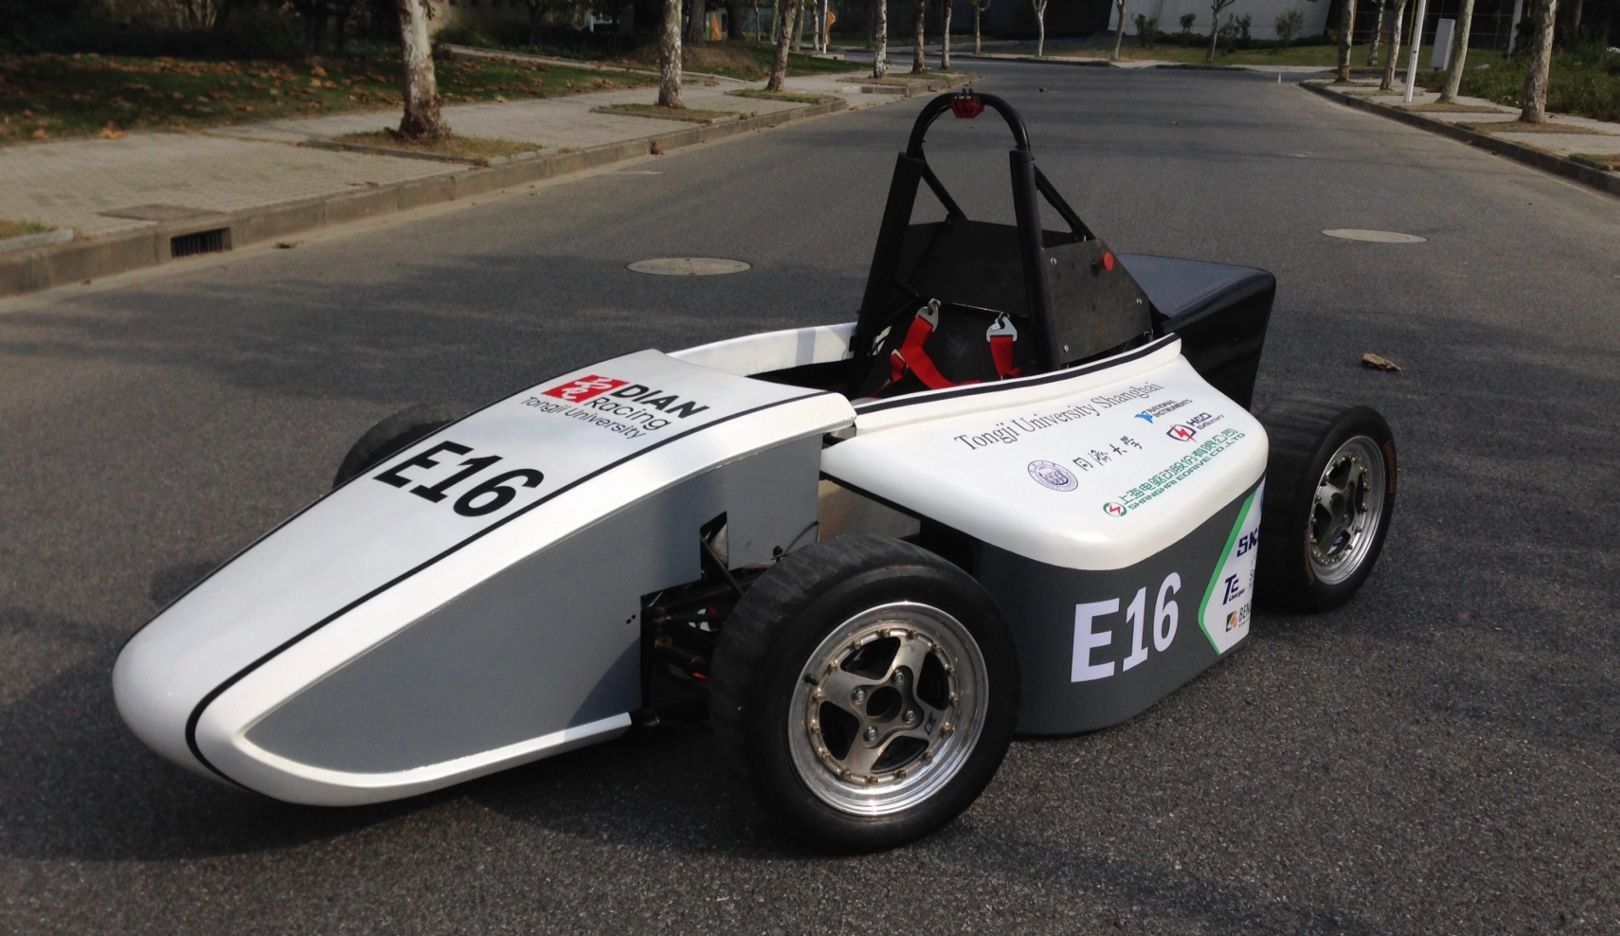 The DRe20 race car is the culmination of an exciting journey. The early DRe13 version hints at the destination but still weighs 440 kilograms.